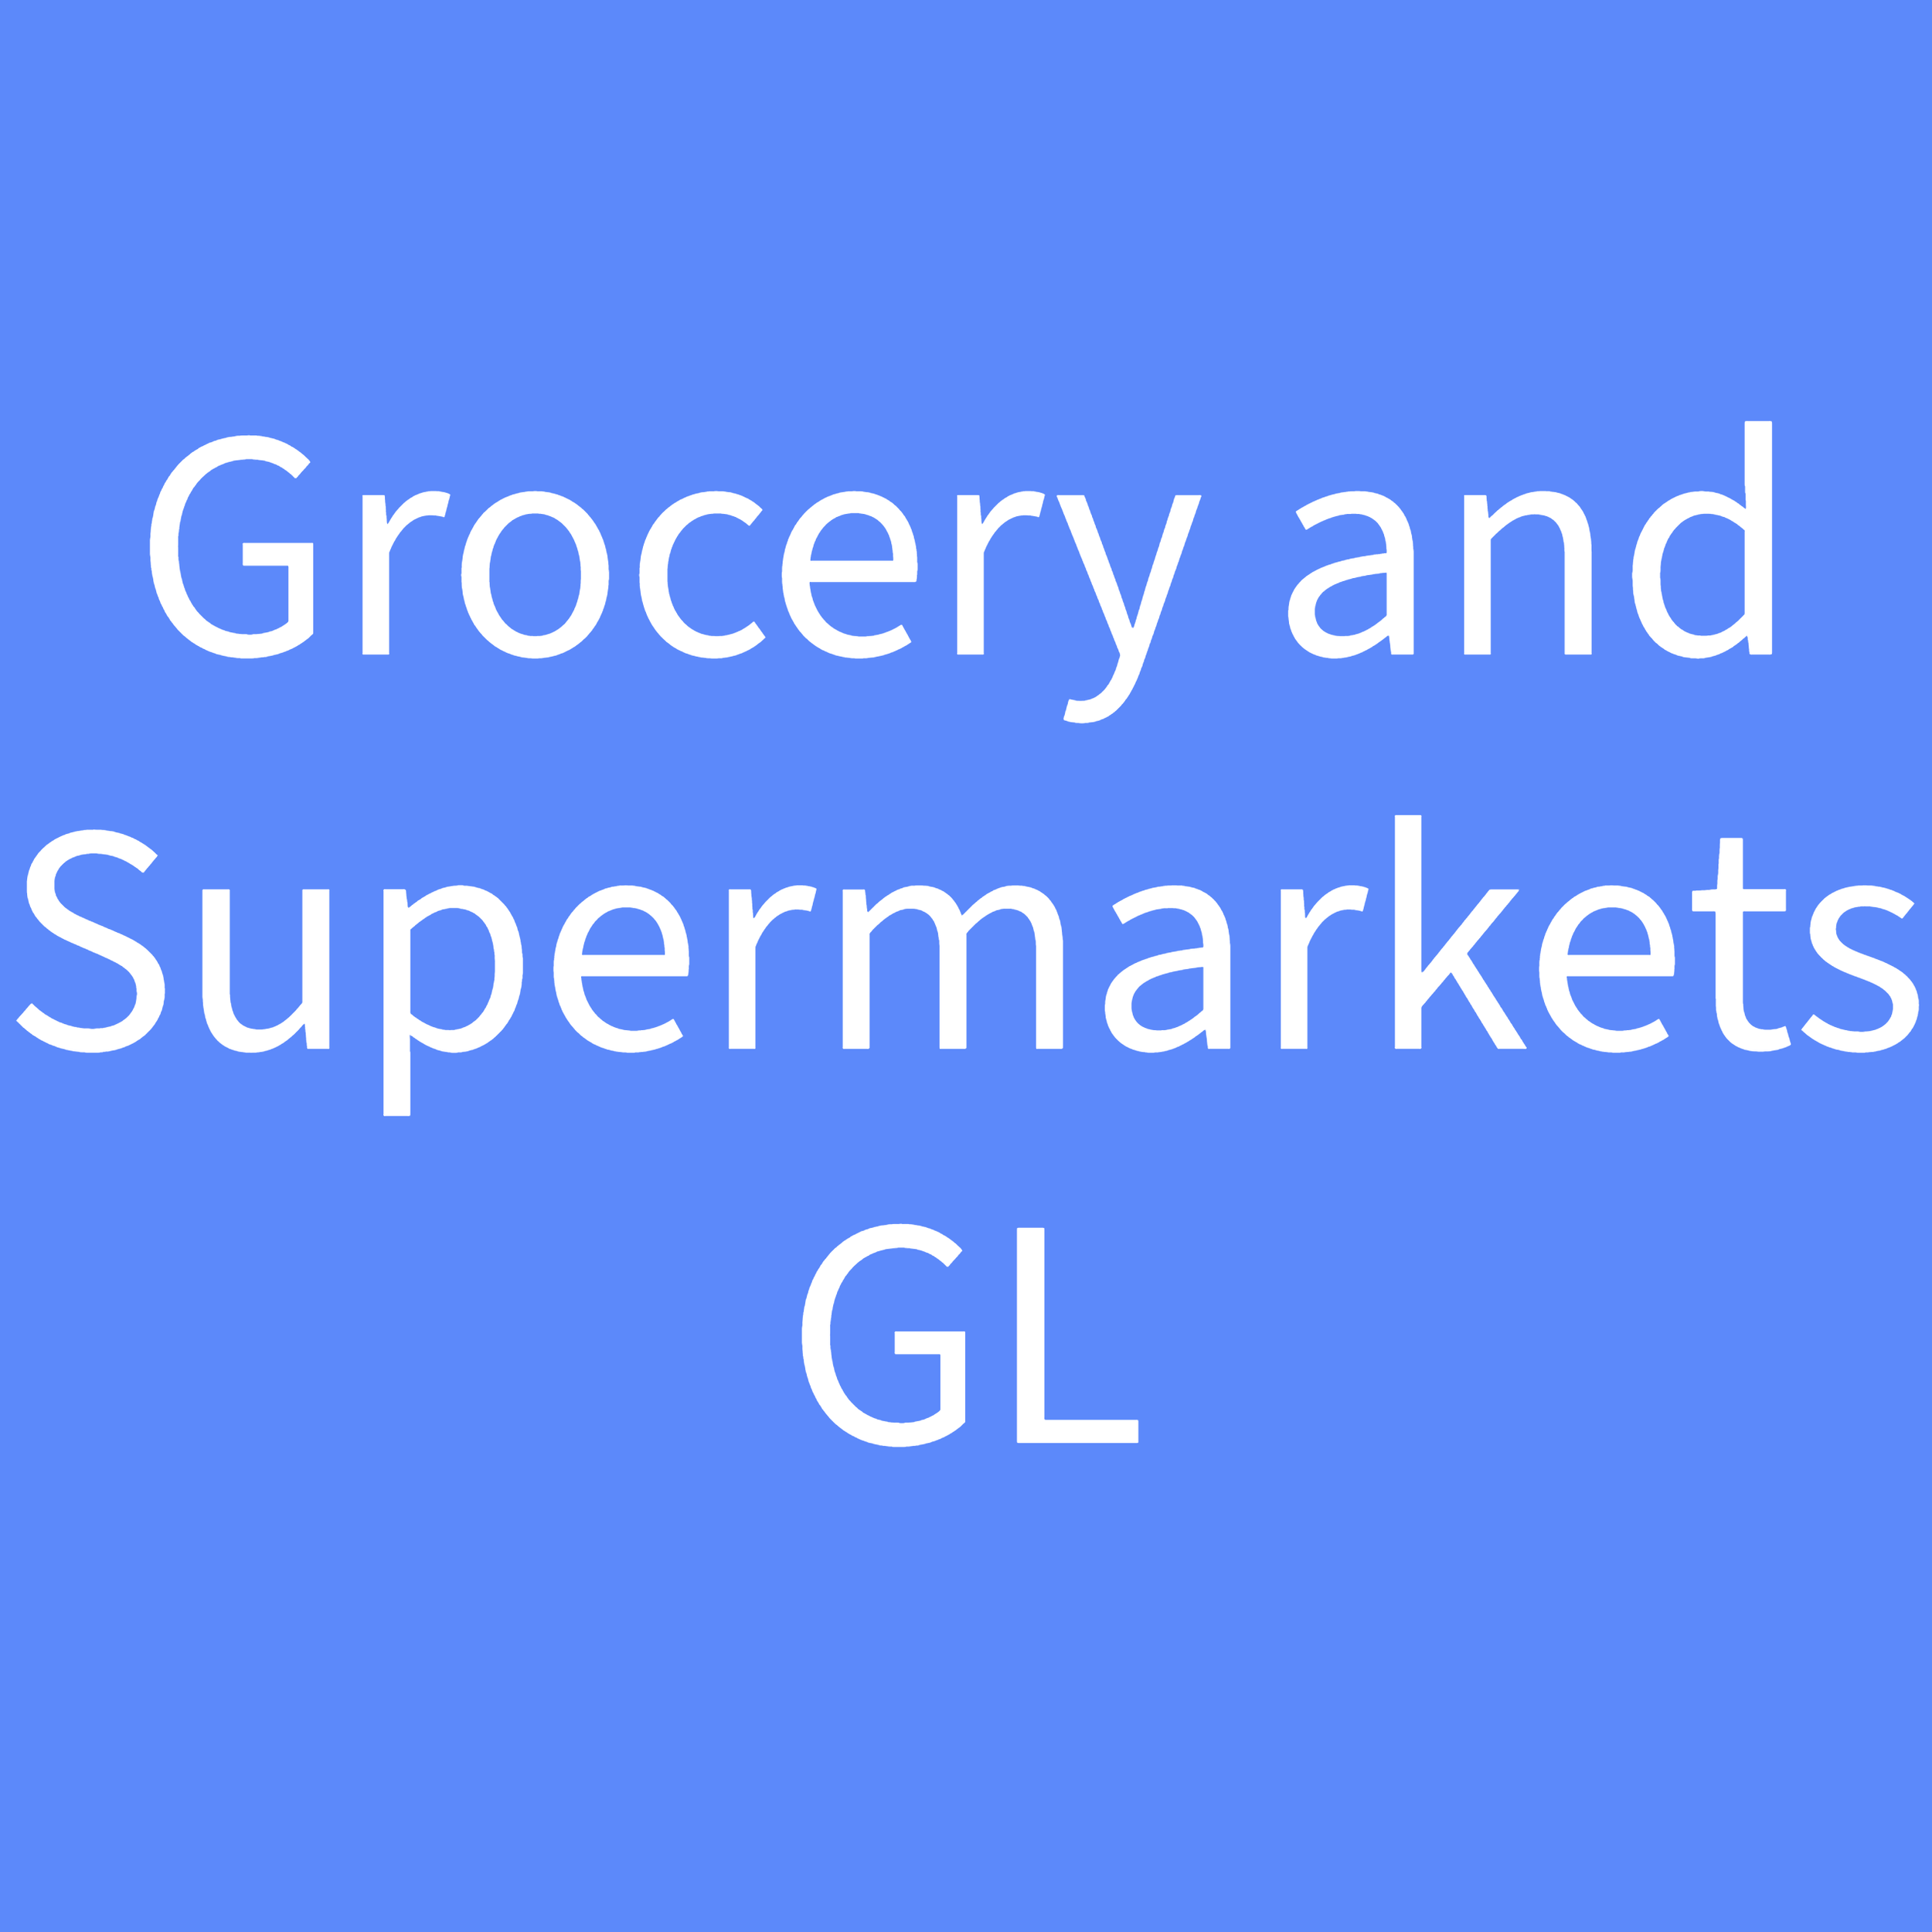 Grocery and Supermarkets GL 